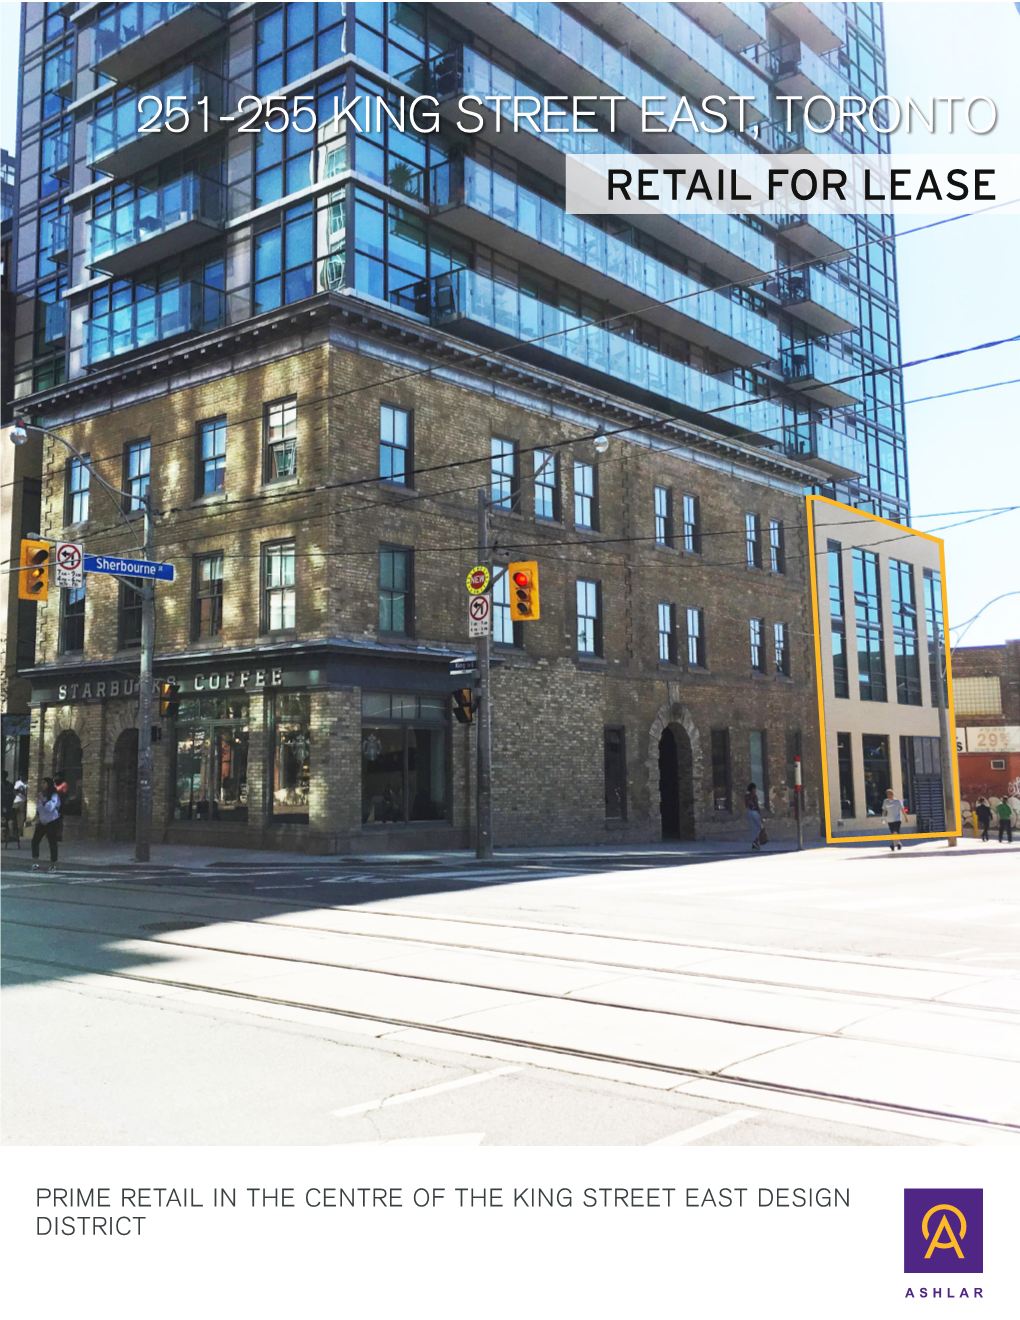 251-255 King Street East, Toronto Retail for Lease